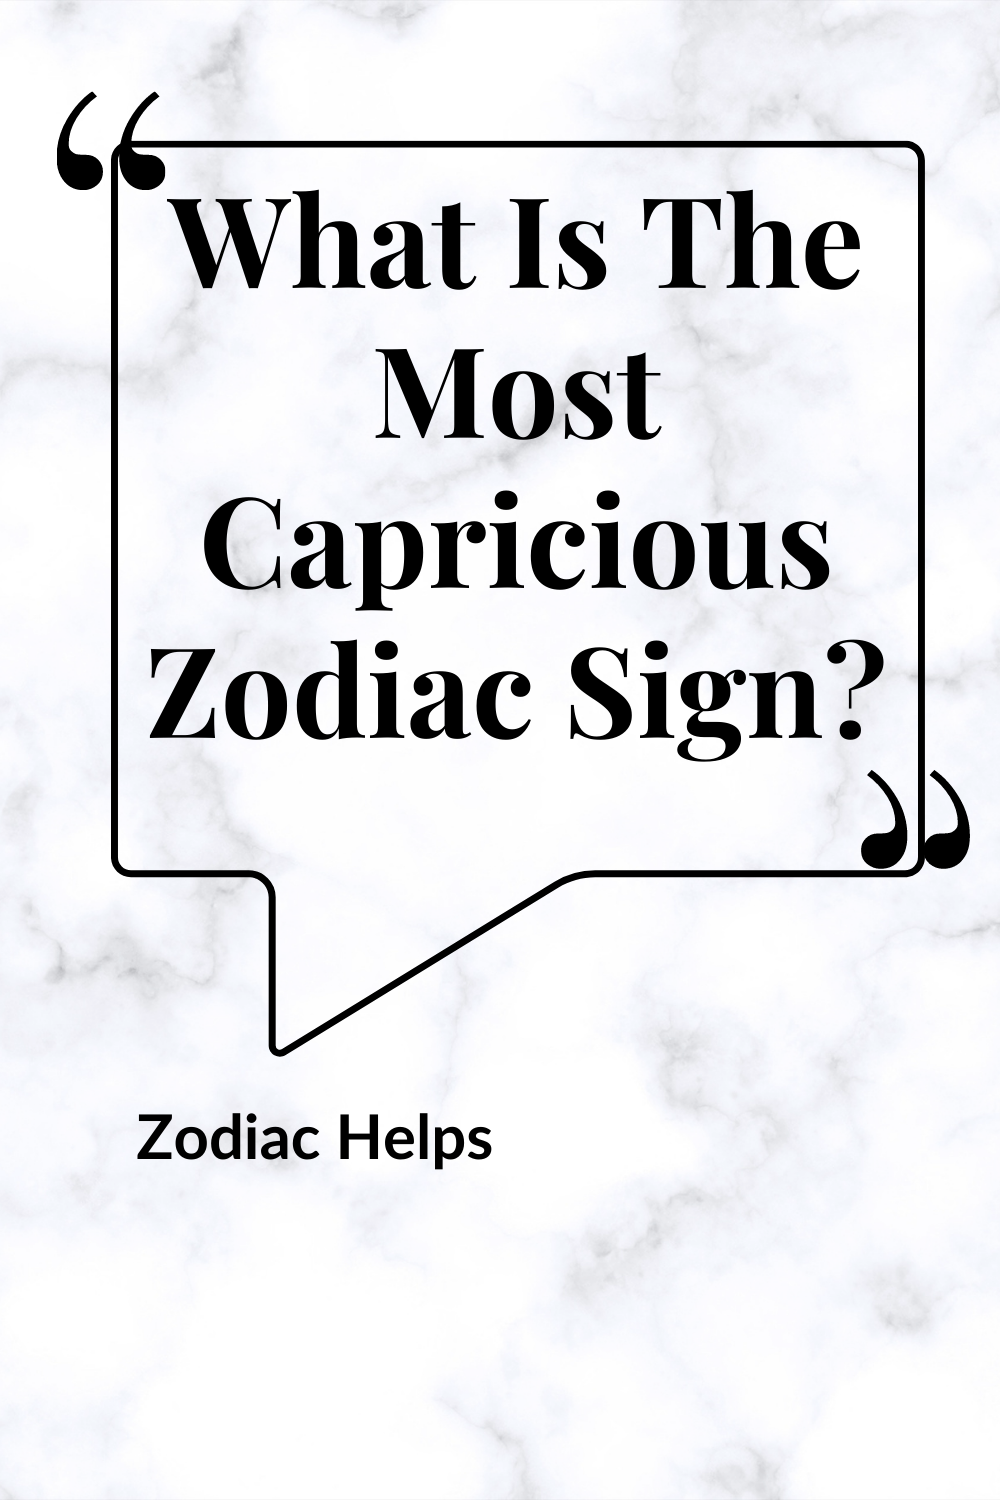 What Is The Most Capricious Zodiac Sign?